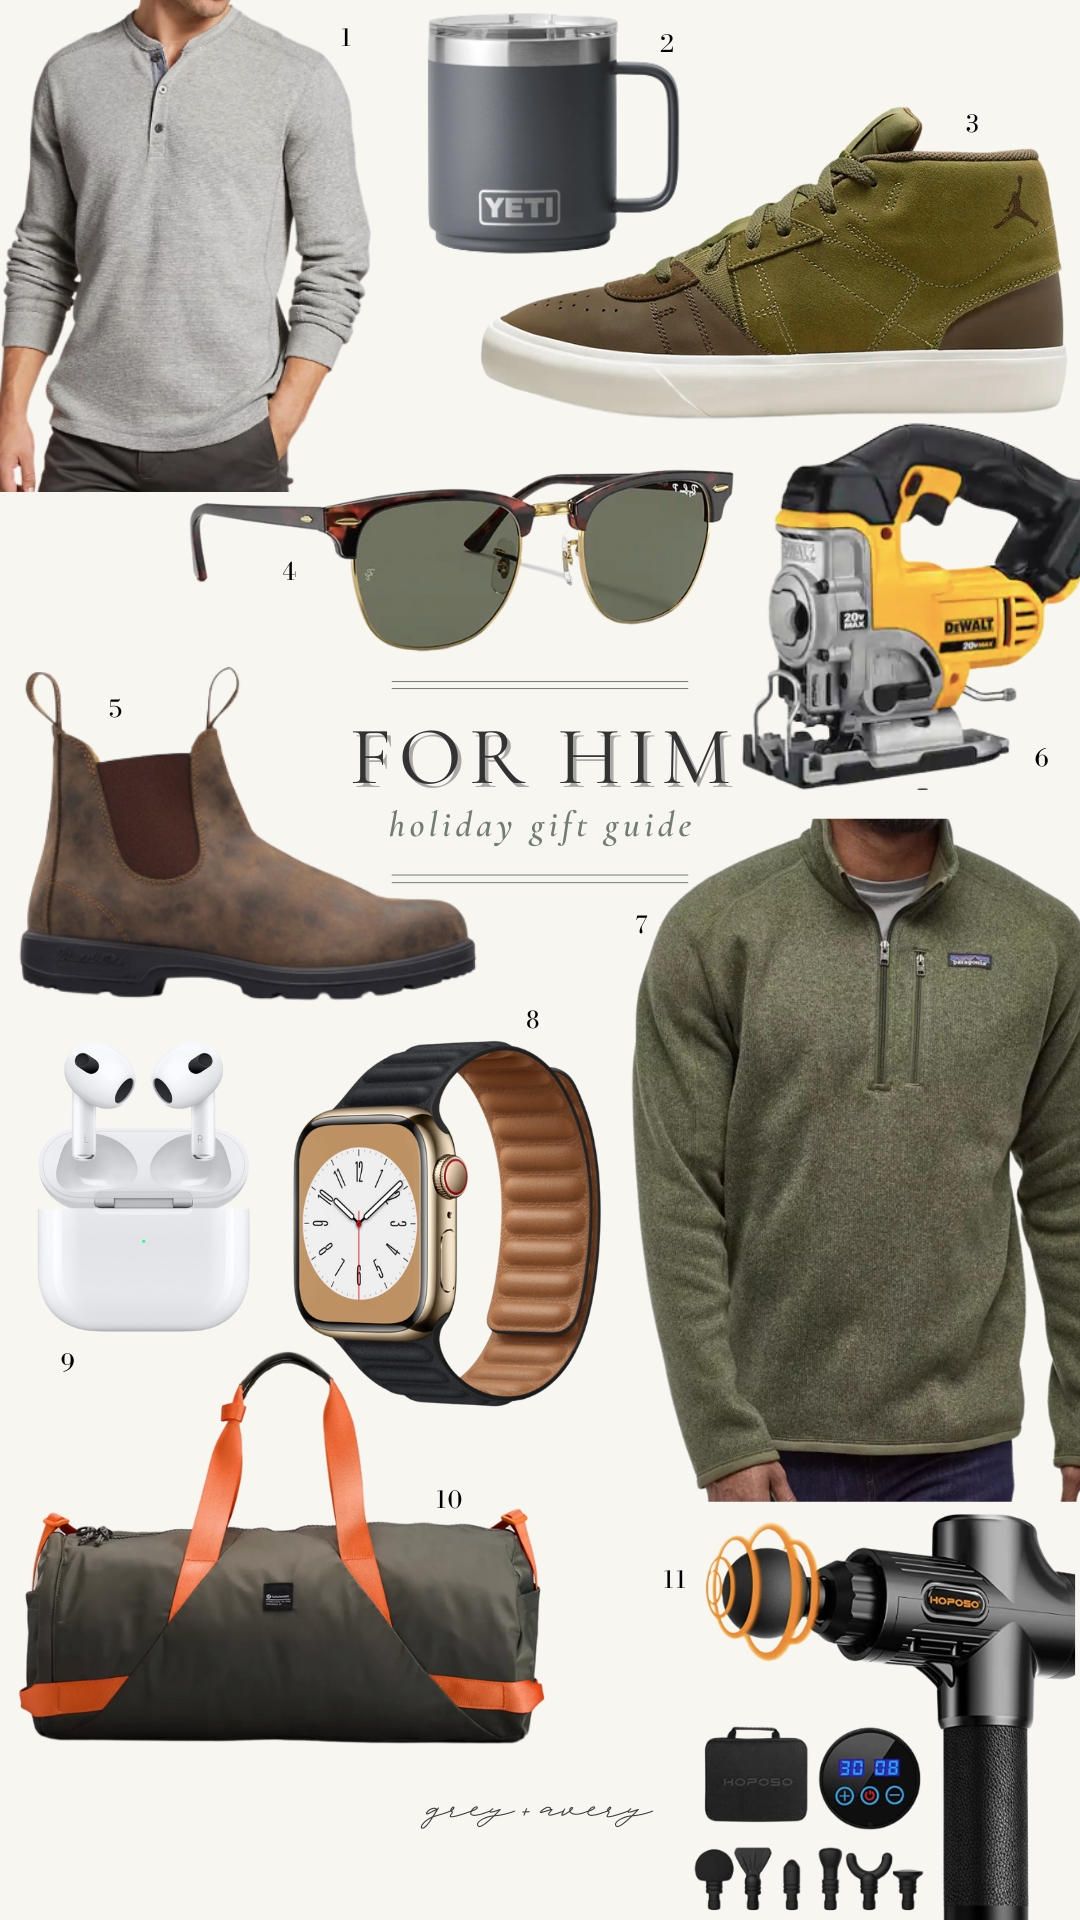 HOLIDAY GIFT GUIDE: FOR HIM